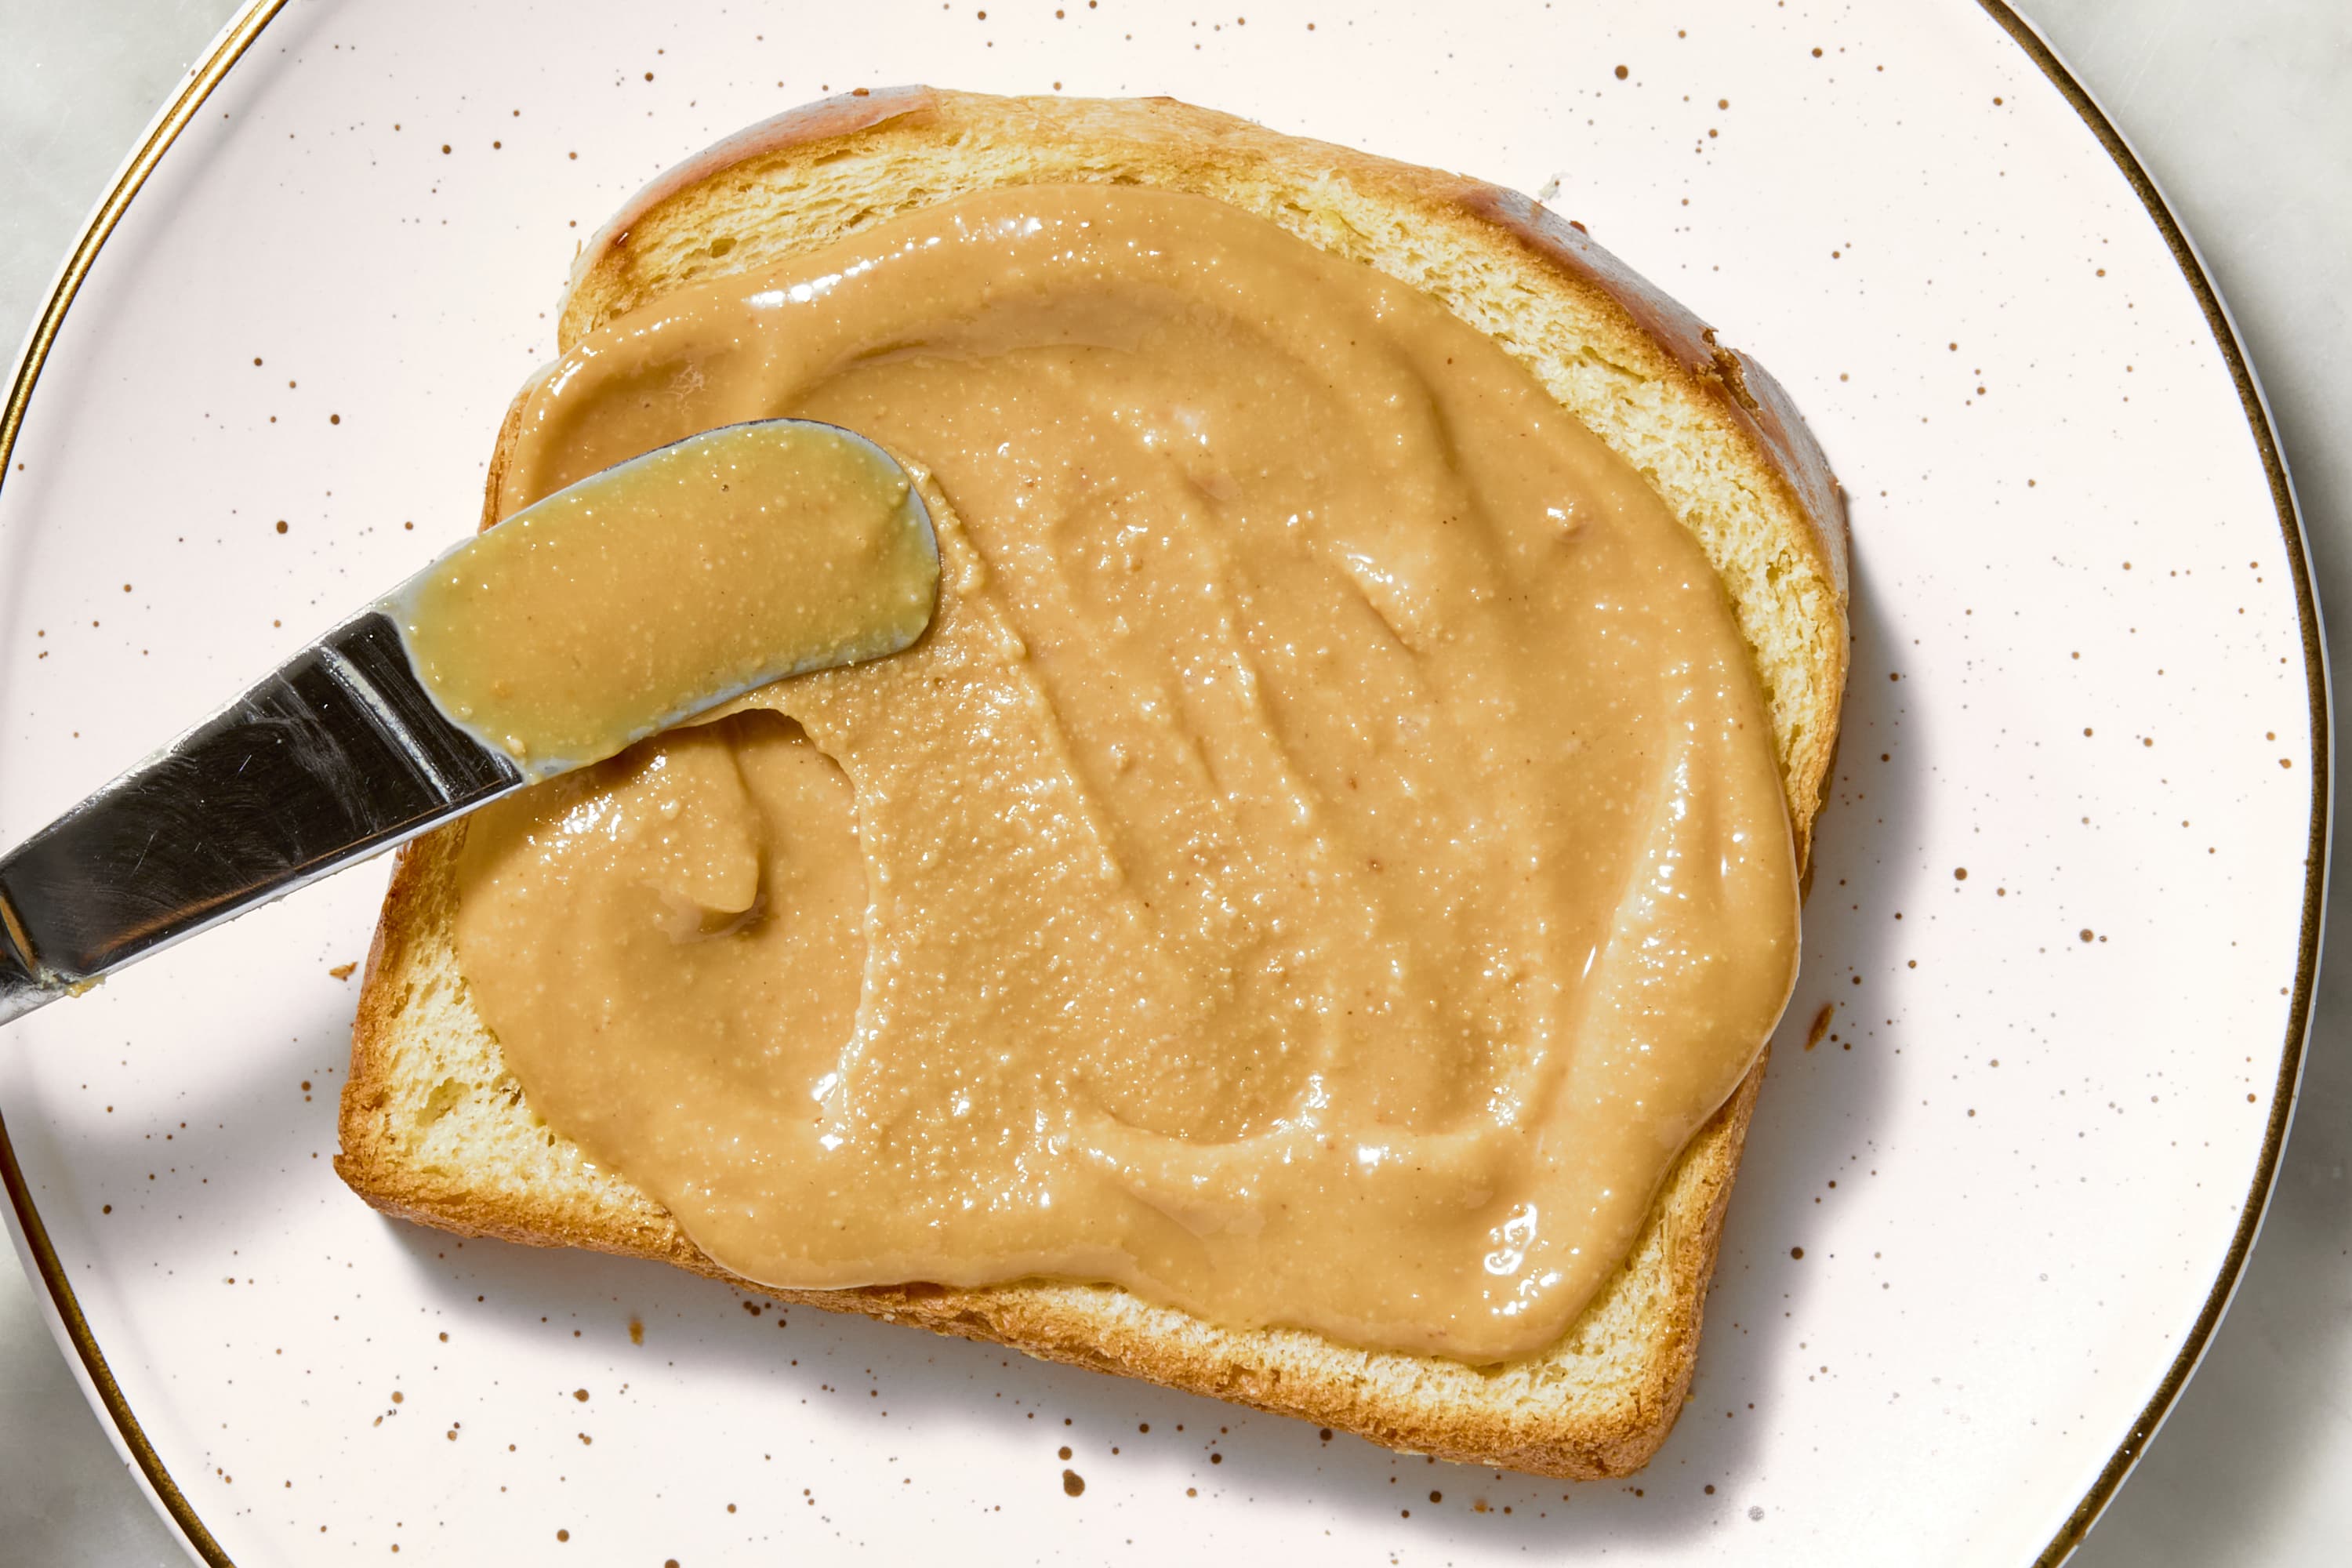 How to Make Peanut Butter